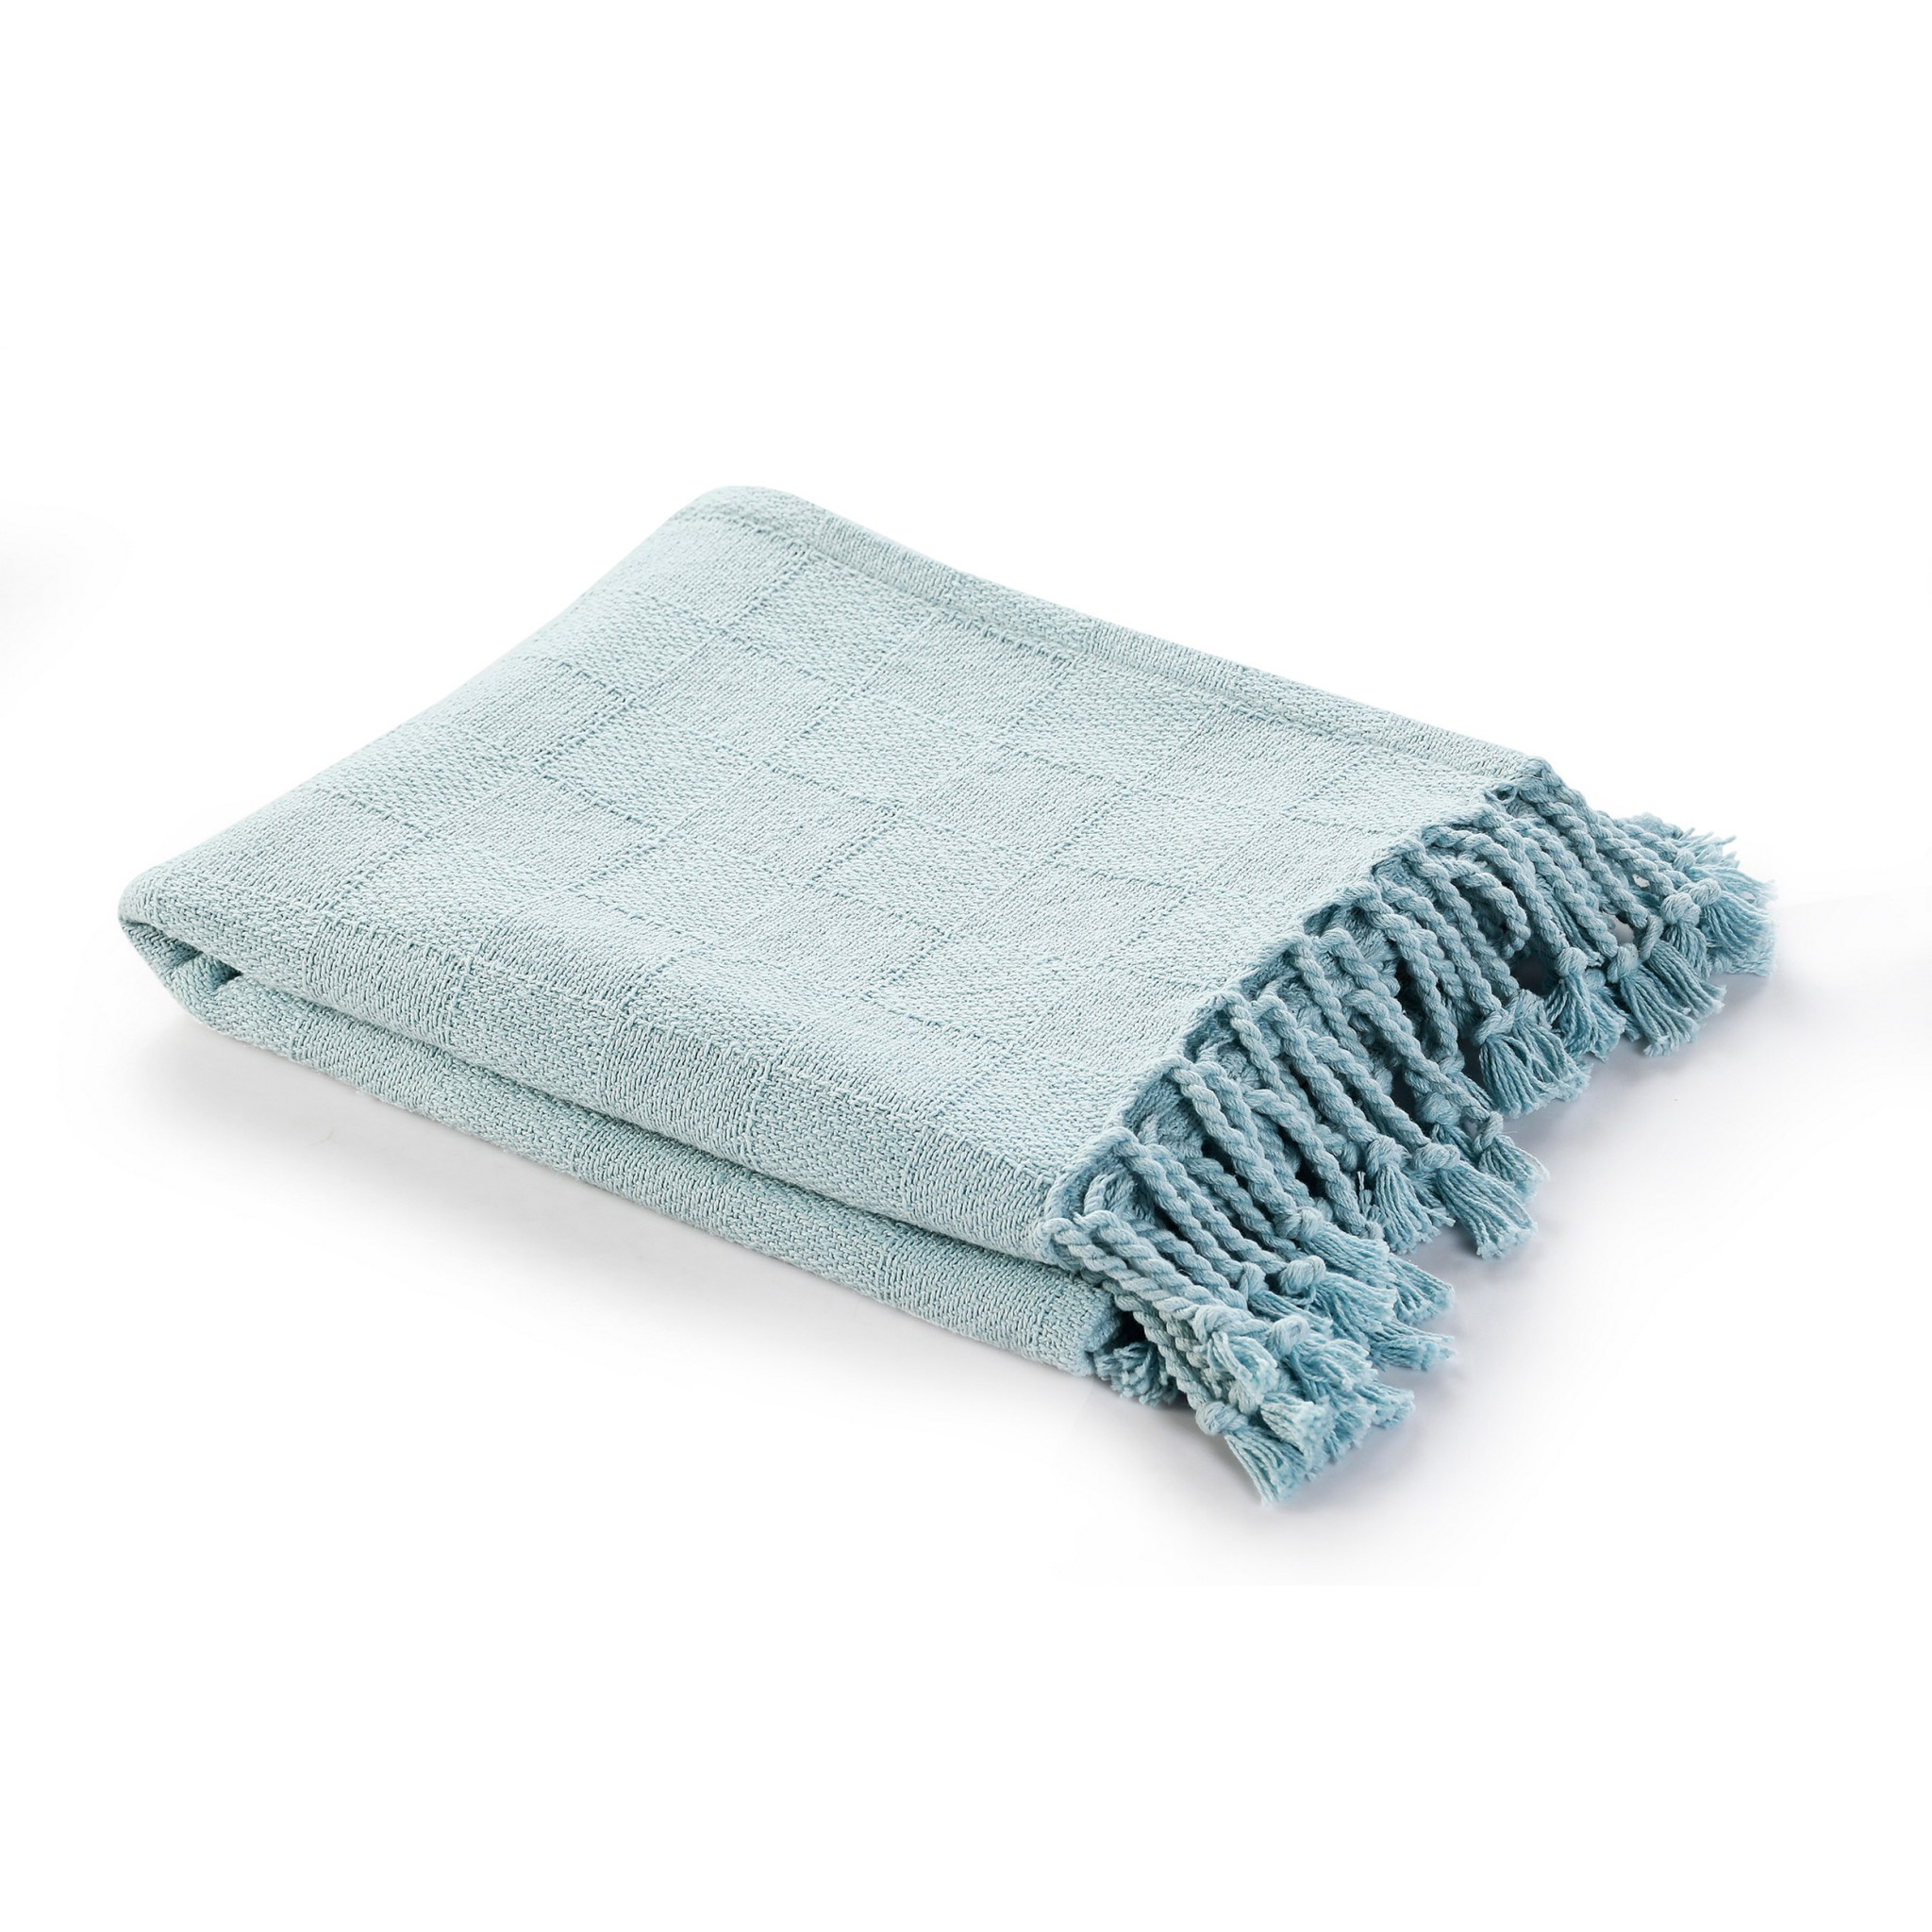 Blue Woven Cotton Solid Color Throw Blanket-516559-1